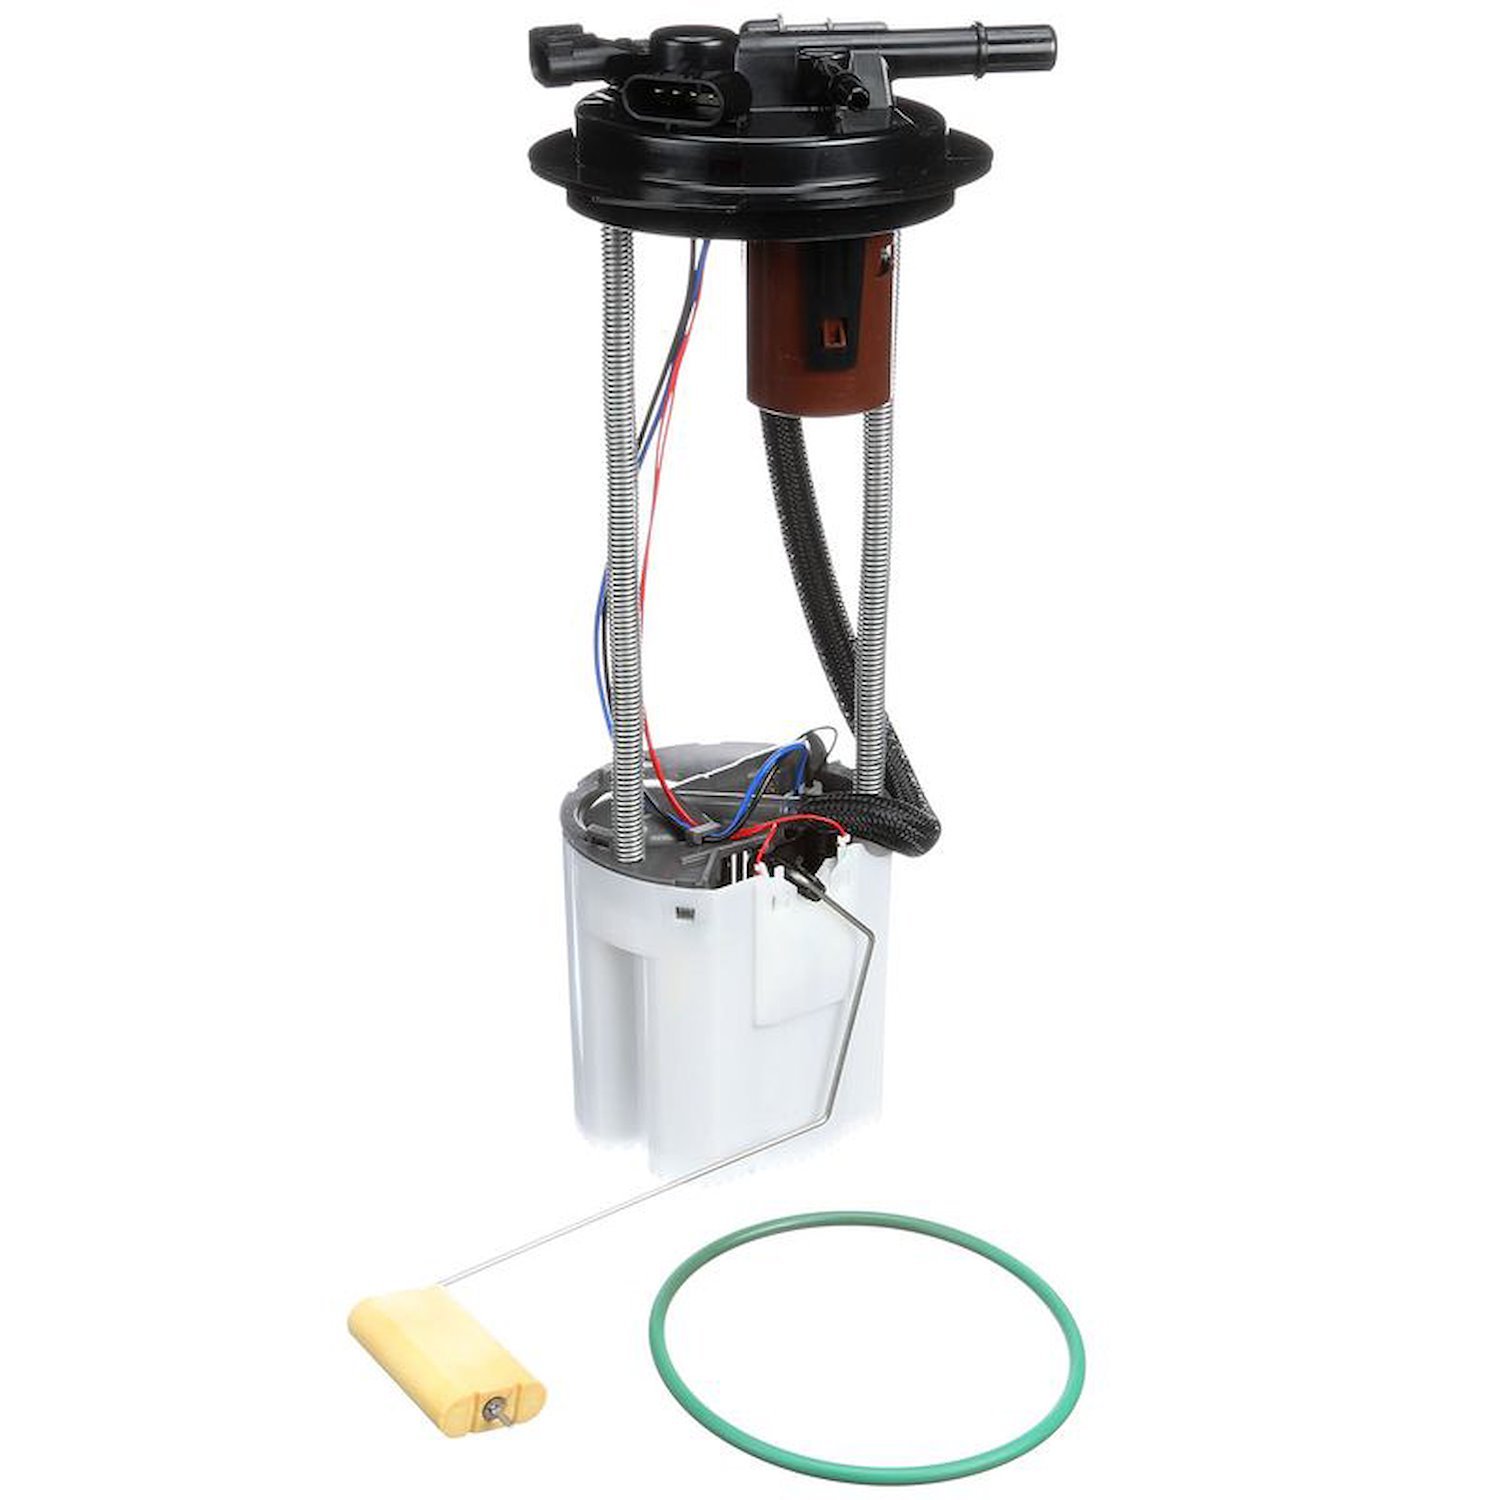 OE GM Replacement Electric Fuel Pump Module Assembly for 2009 Chevy Silverado/GMC Sierra 1500